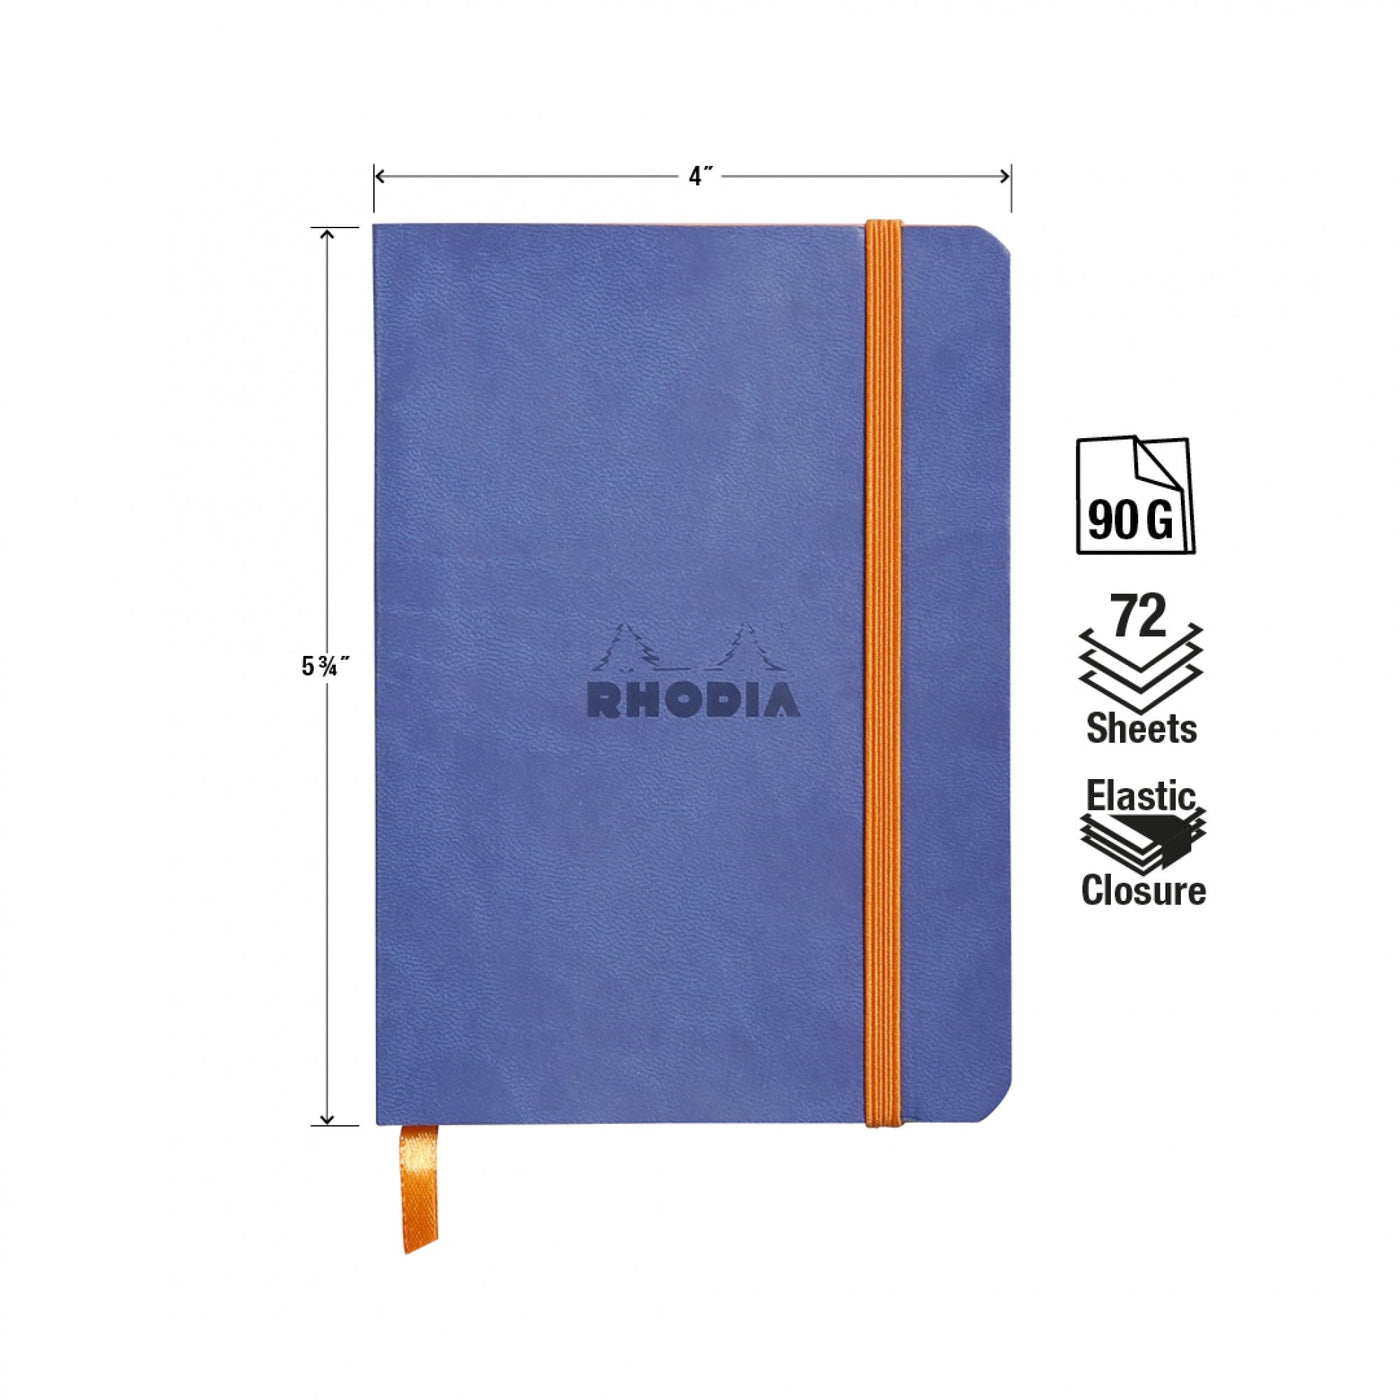 Rhodia Rhodiarama Sapphire A6 Soft Cover Dotted Notebook Measurements